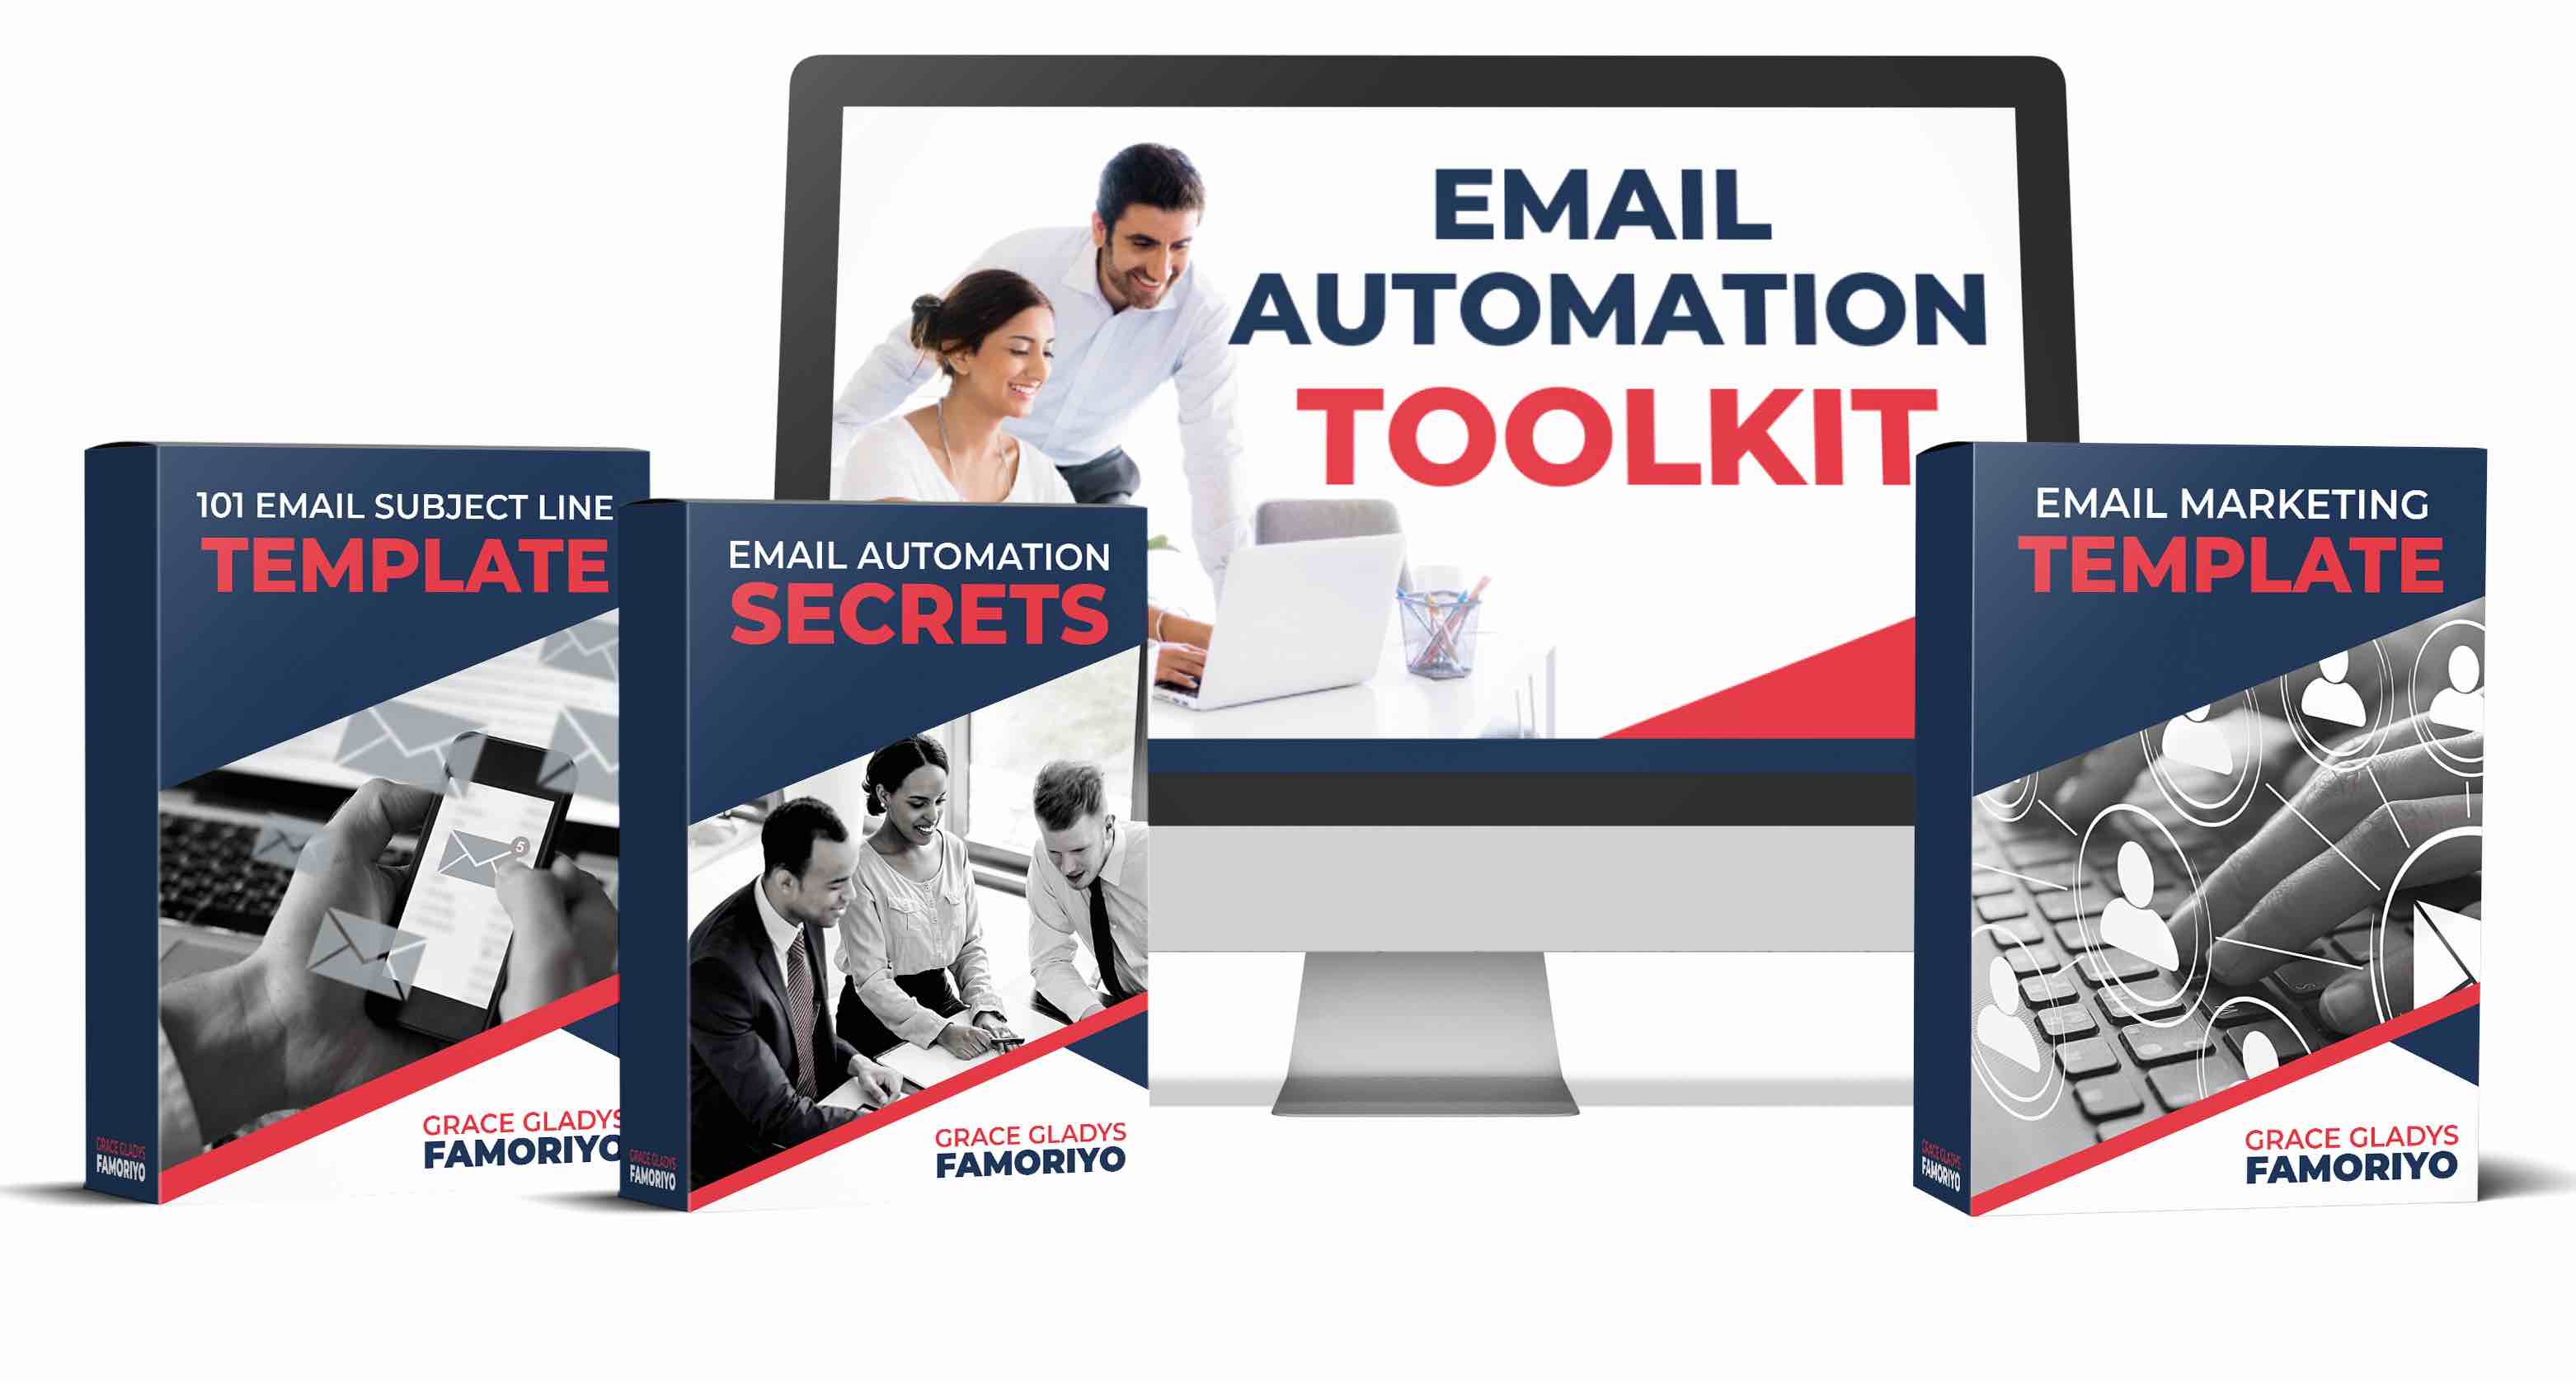 Email Automation Toolkit - Grace Gladys Famoriyo Brands